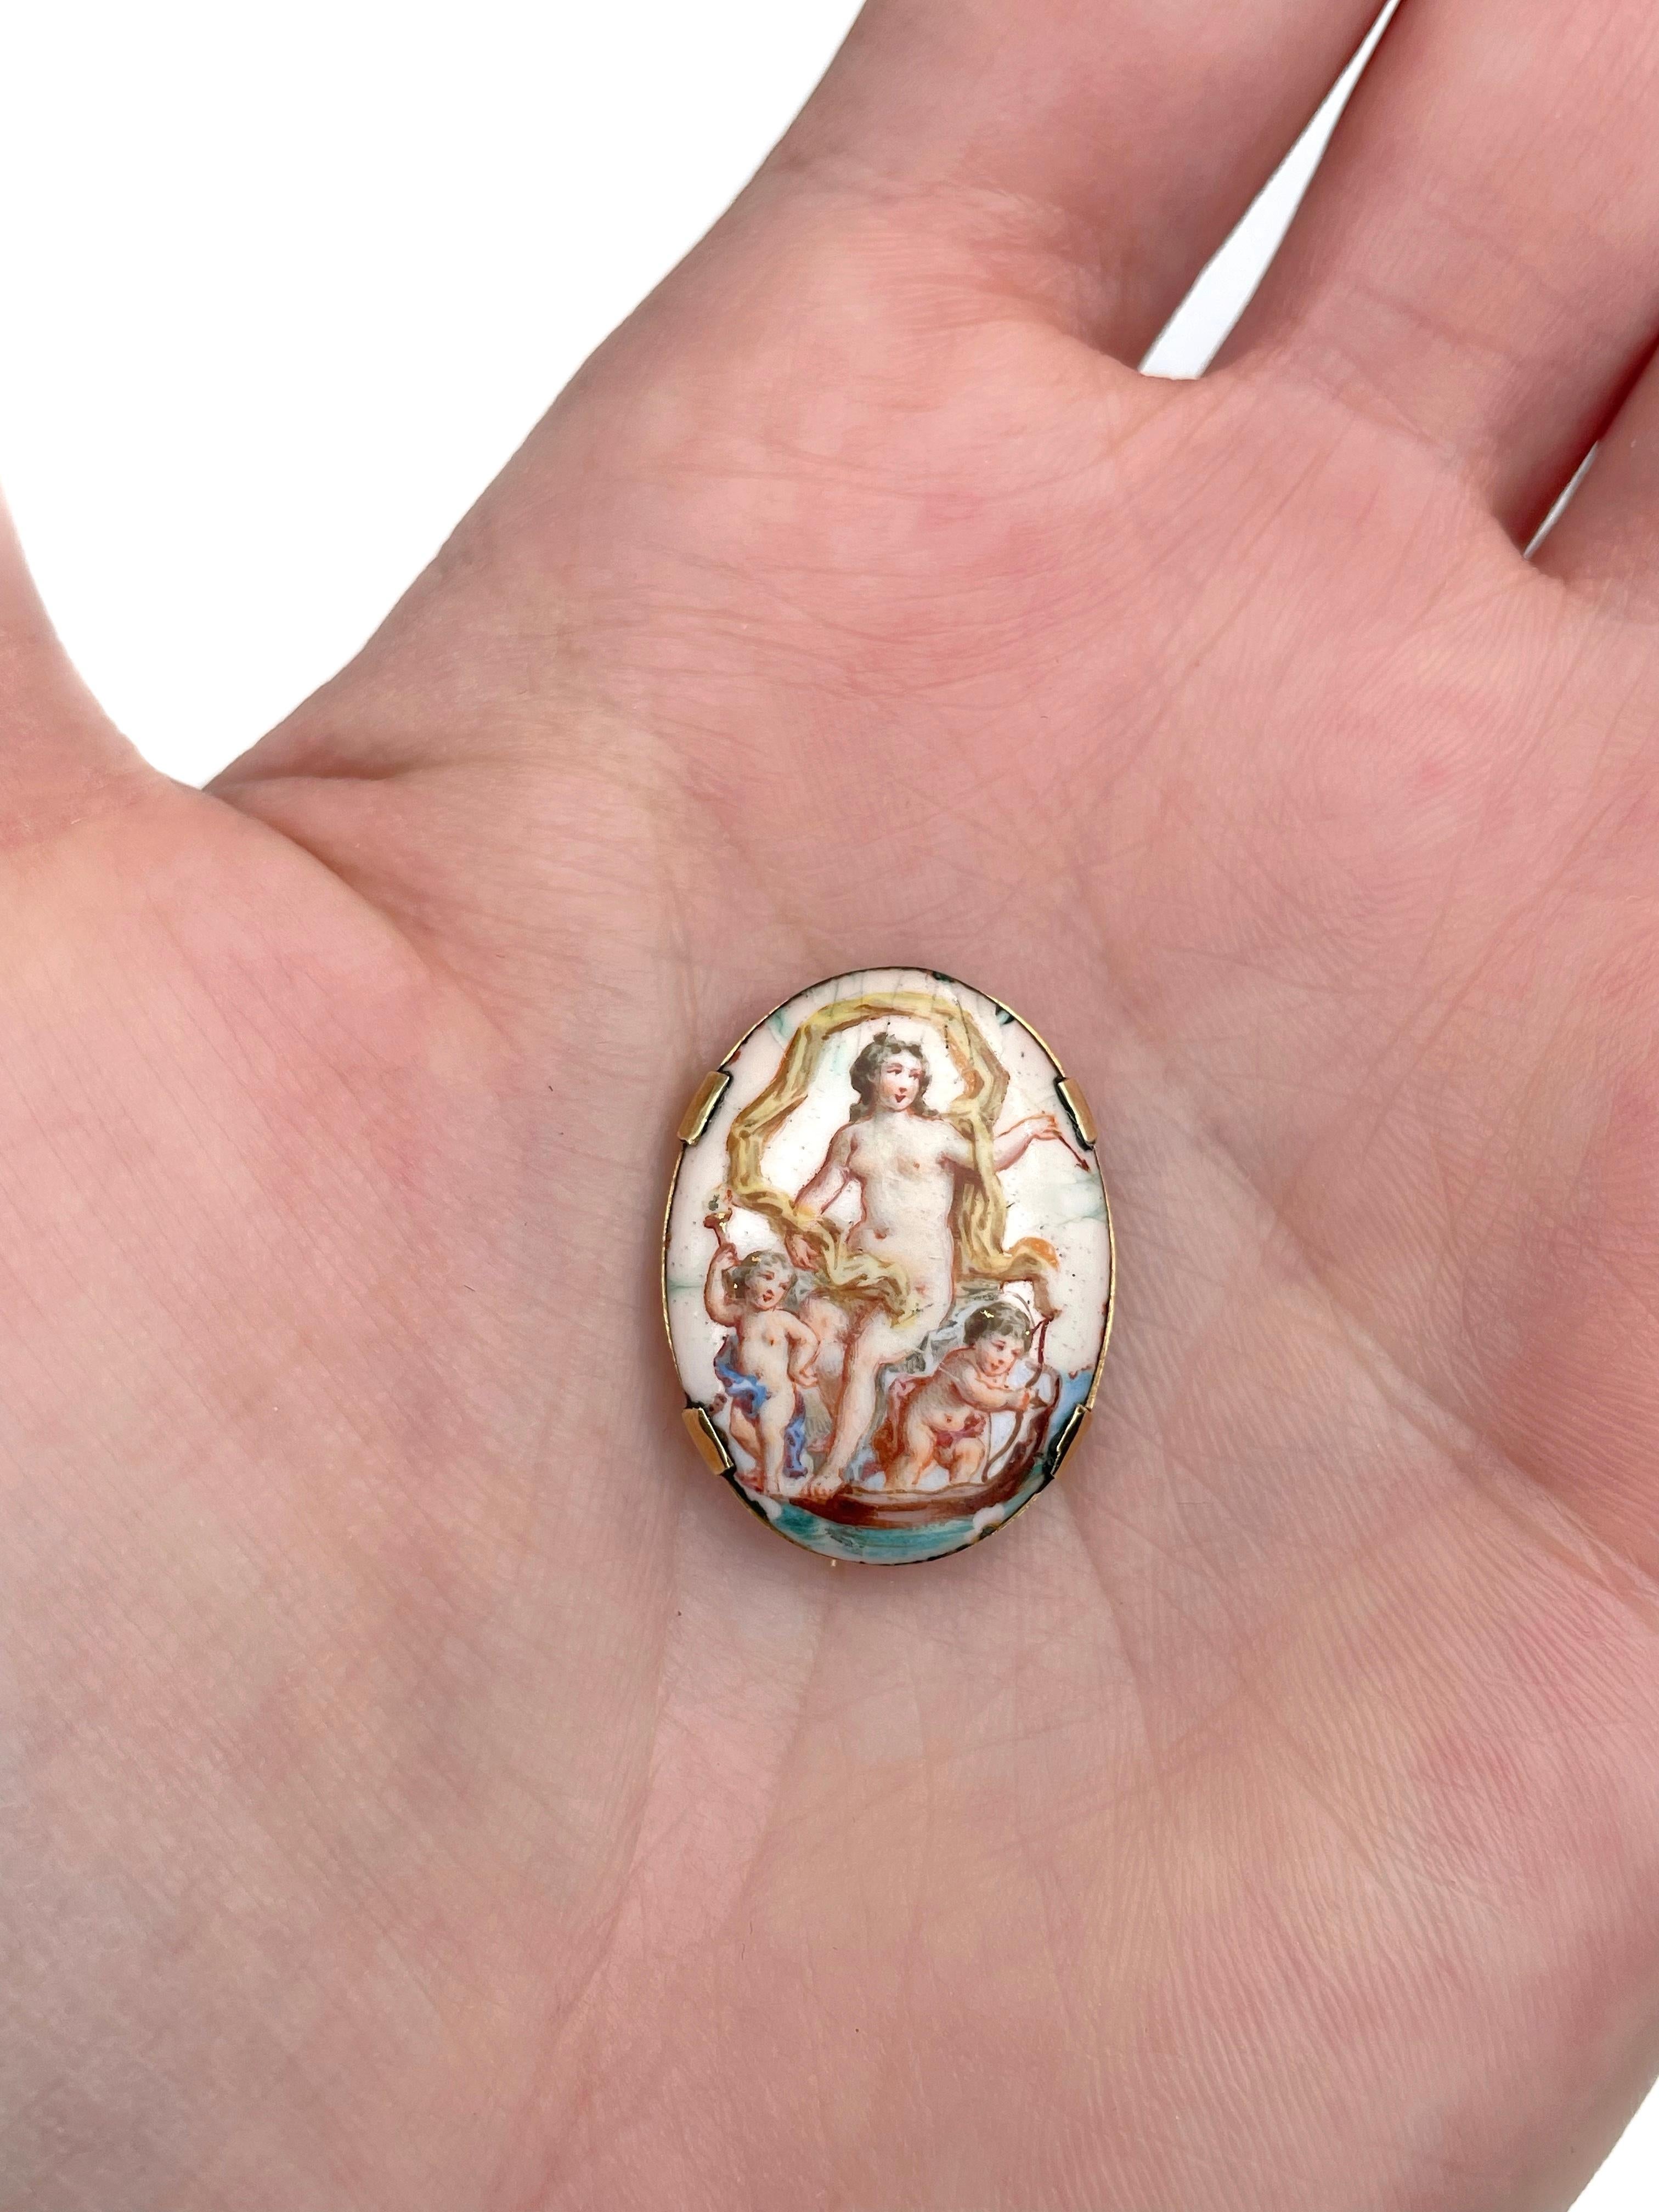 This is a small oval pin brooch crafted in 18K yellow gold (needle - 14K gold). 

Circa 1880.

The piece features a miniature painting depicting a lady with two angels. It is hand painted on a porcelain.


Weight: 3.94g
Size: 2.3x1.8cm

———

If you